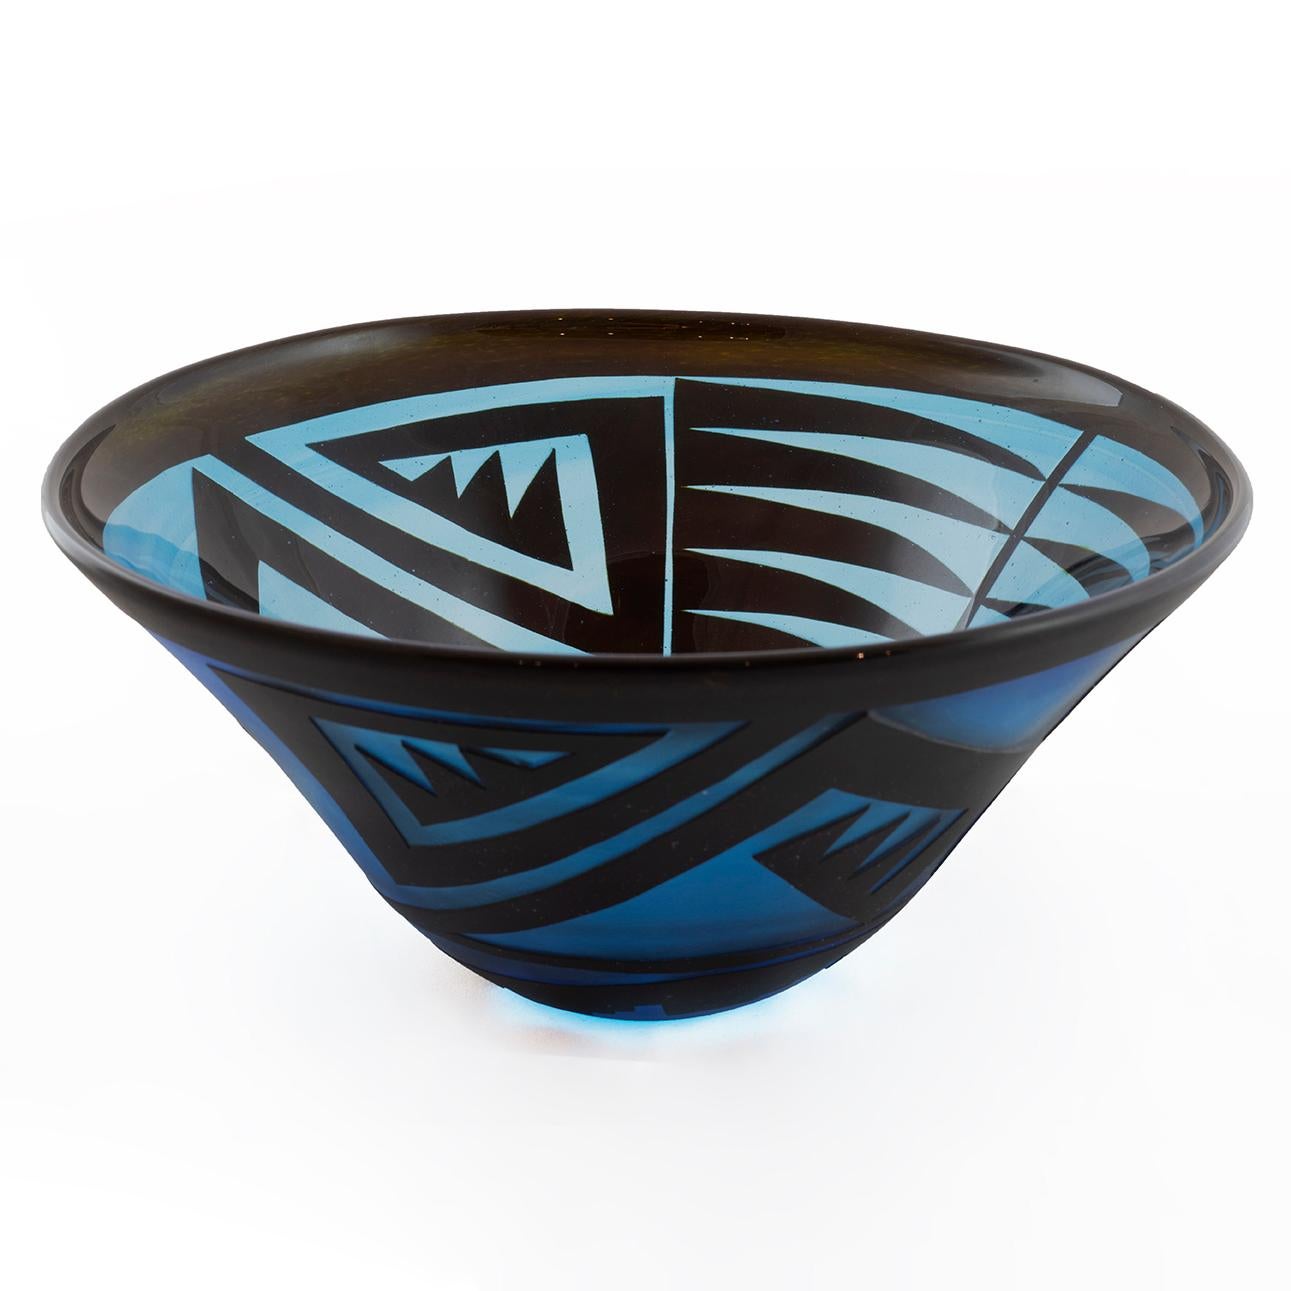 Ira Lujan Abstract Sculpture - Blue Bowl with Black Designs